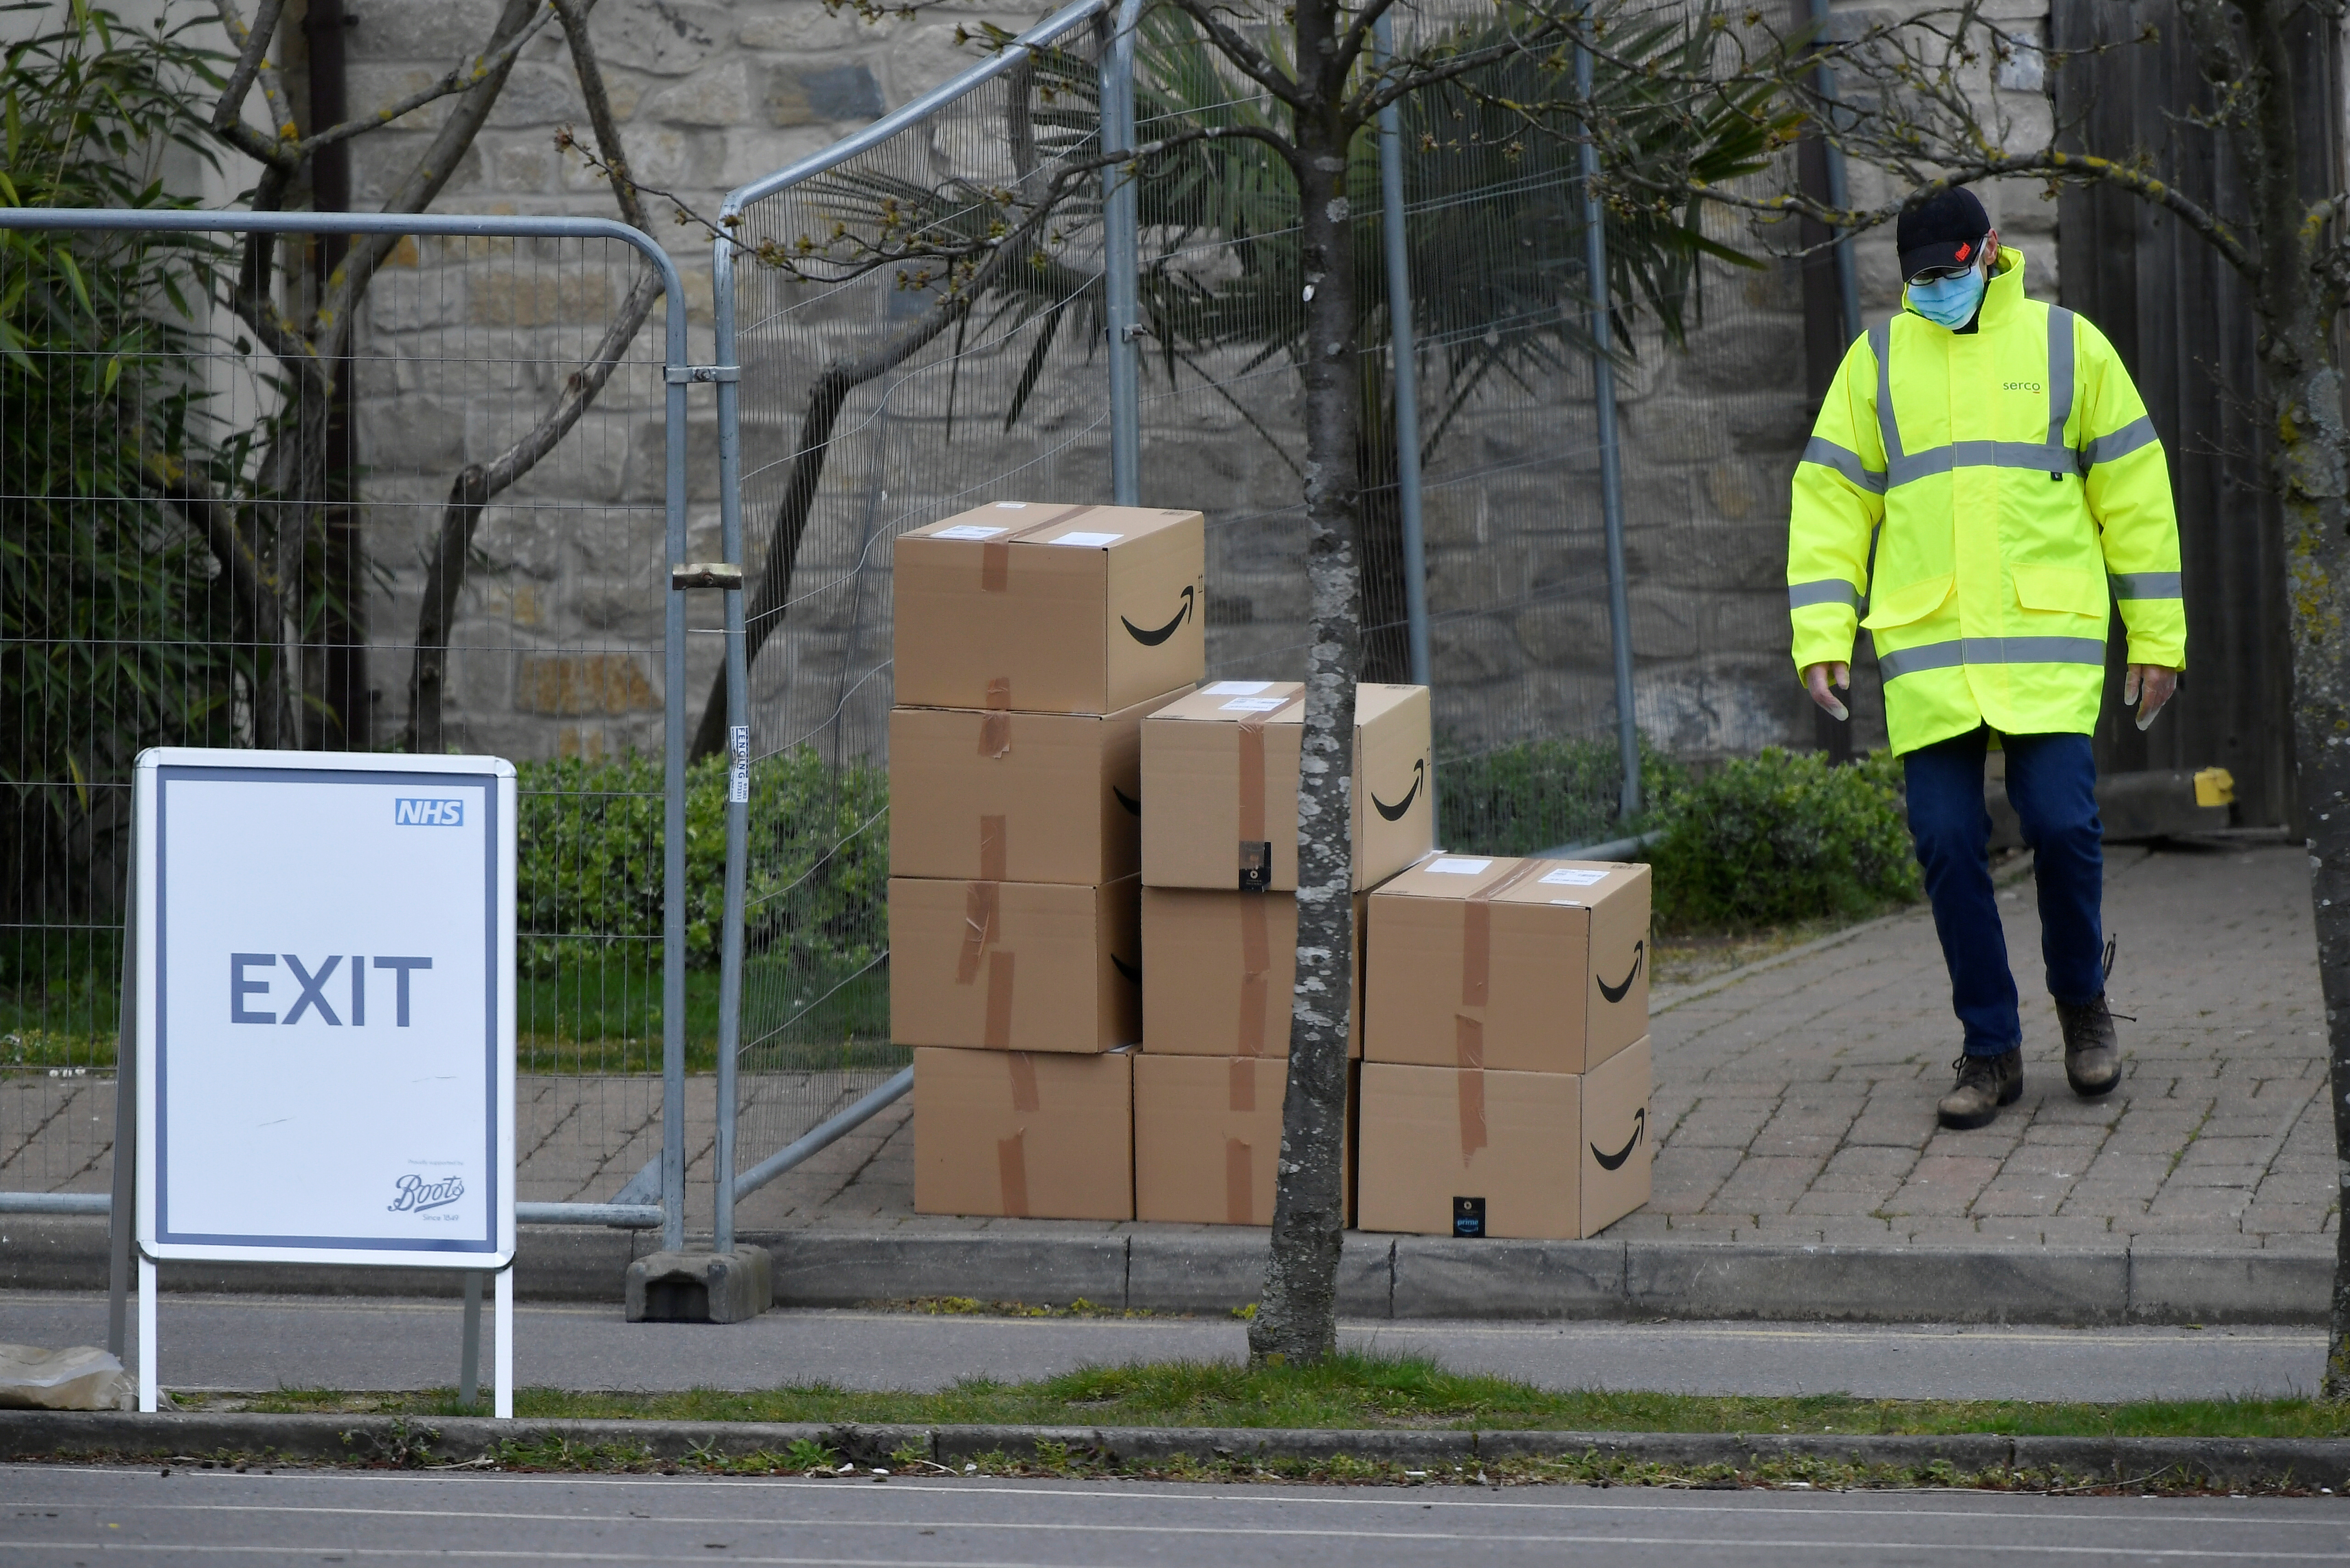  Boxes with a Amazon logo are seen arriving at a coronavirus test centre in the car park of Chessington World of Adventures as the spread of the coronavirus disease (COVID-19) continues, Chessington, Britain, April 2, 2020. REUTERS/Toby Melville/Files